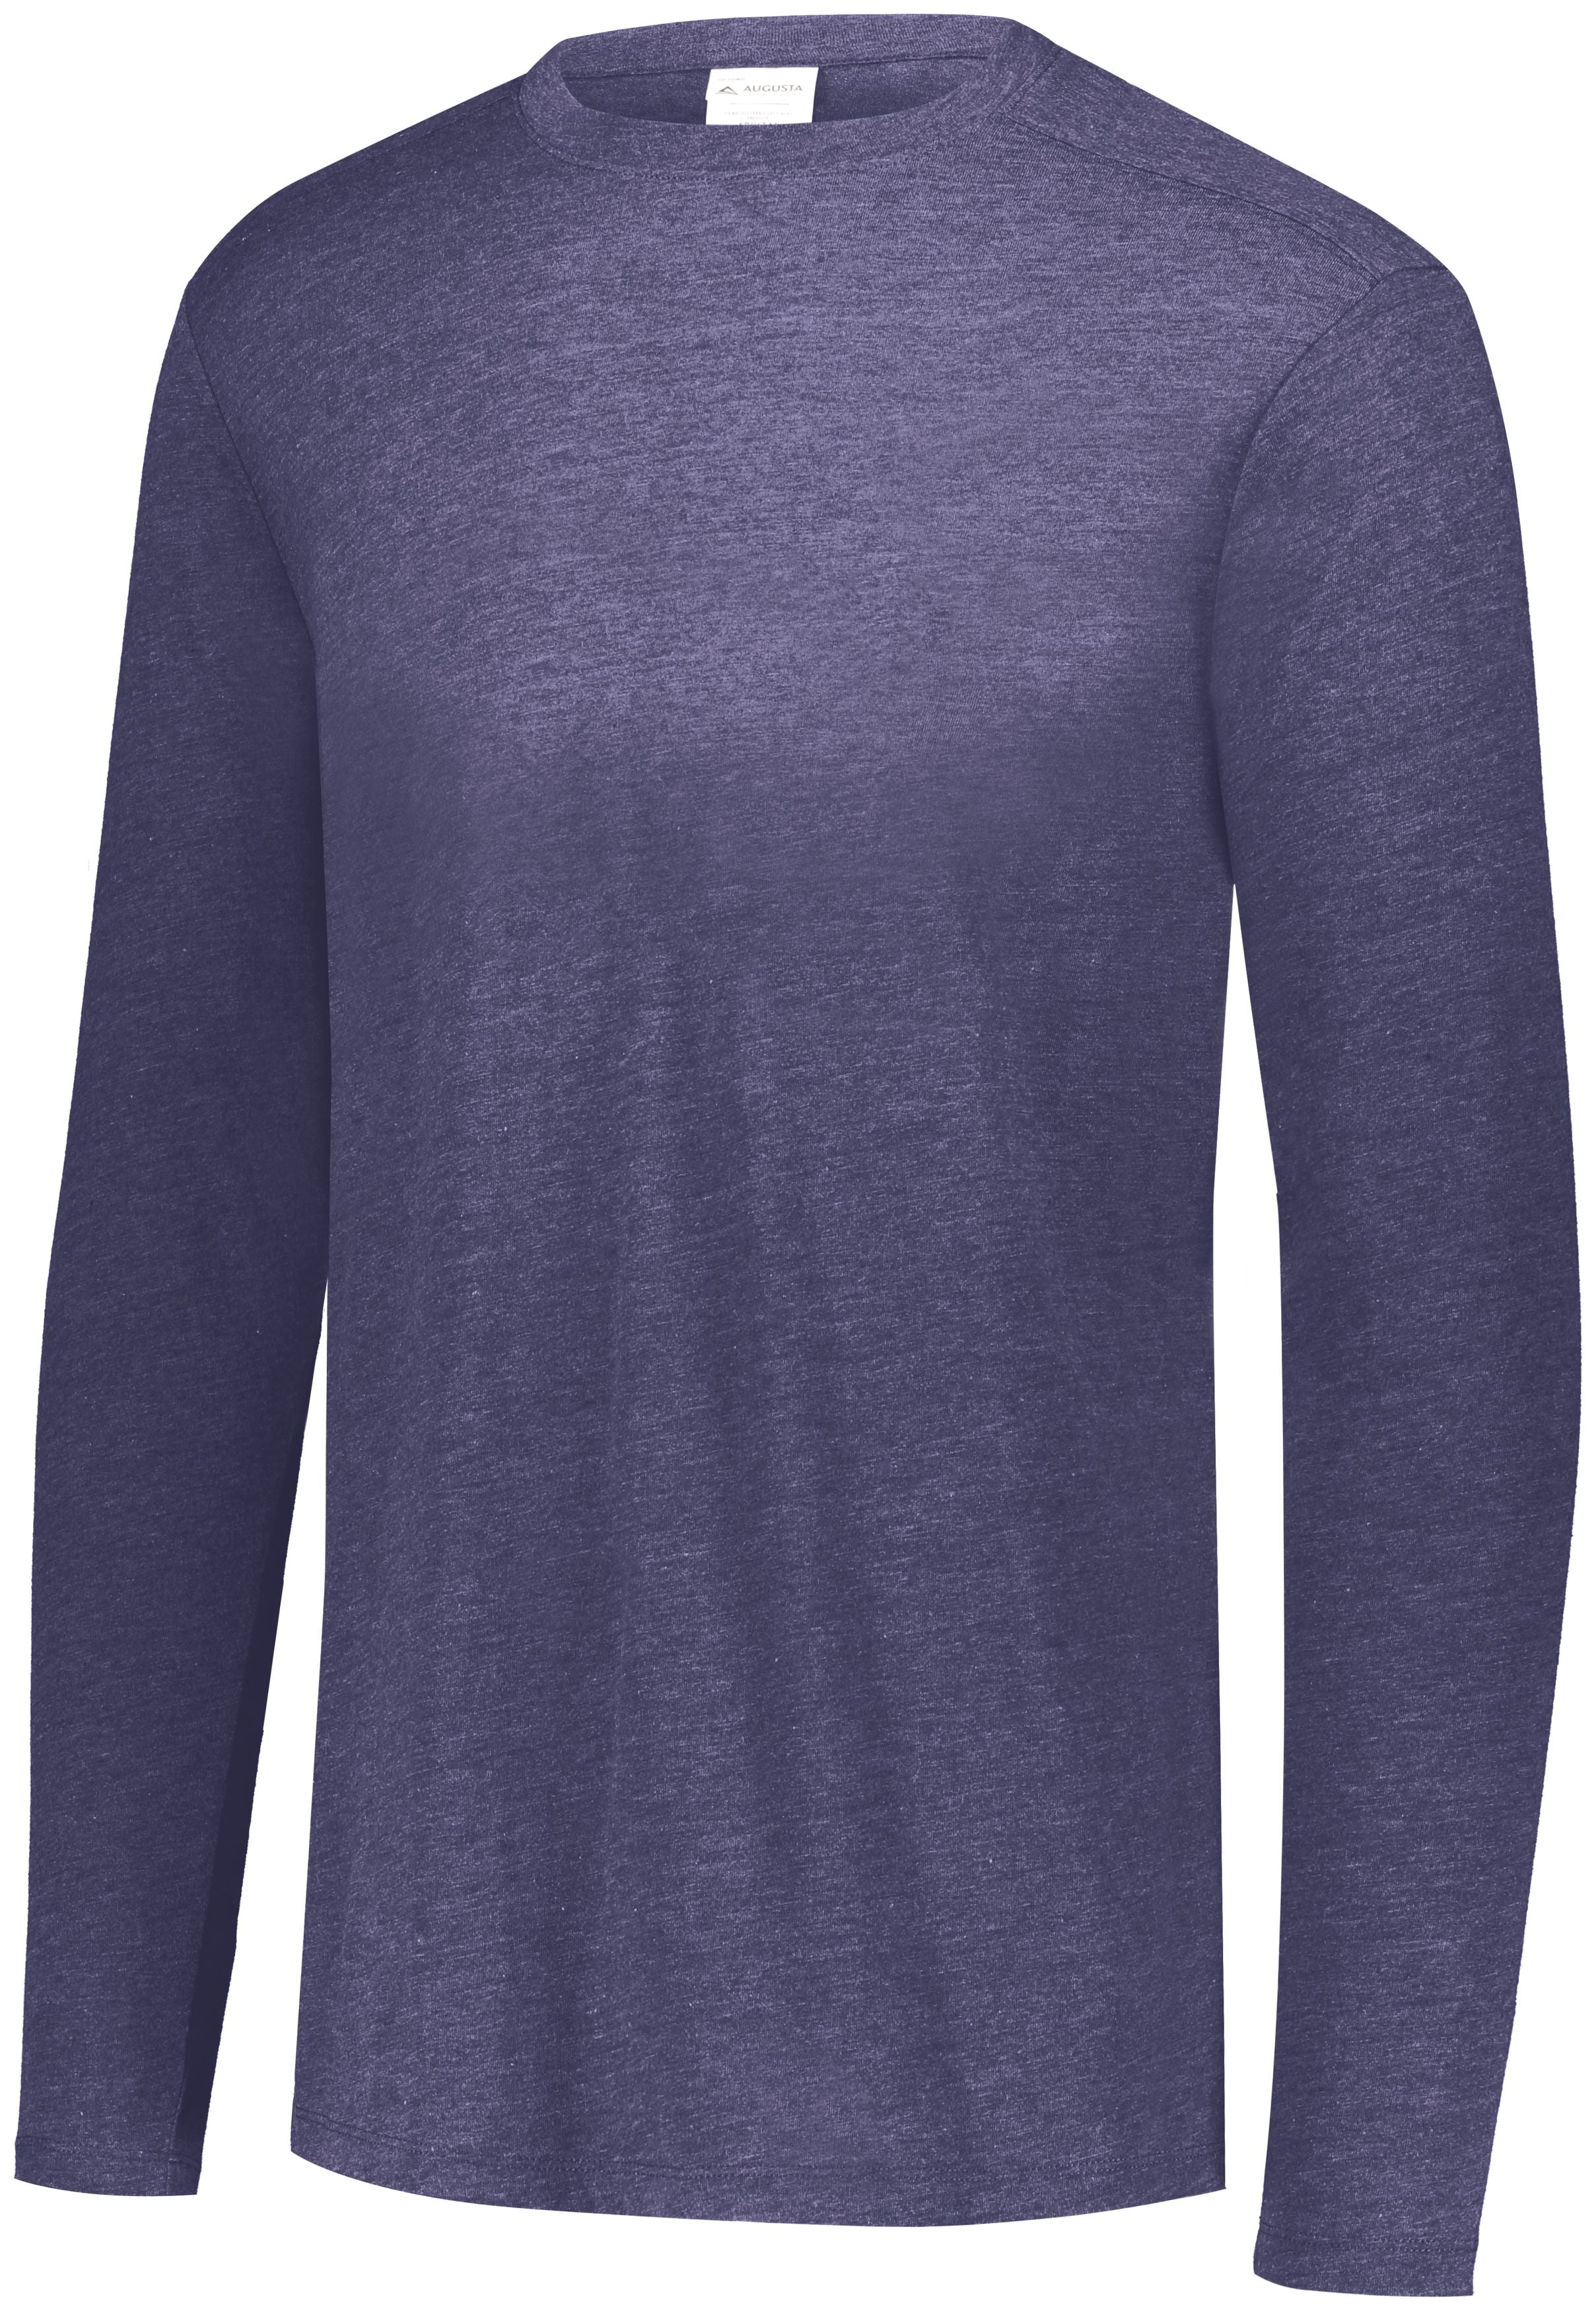 Augusta Sportswear Tri-Blend Long Sleeve Crew in Navy Heather  -Part of the Adult, Augusta-Products, Shirts product lines at KanaleyCreations.com